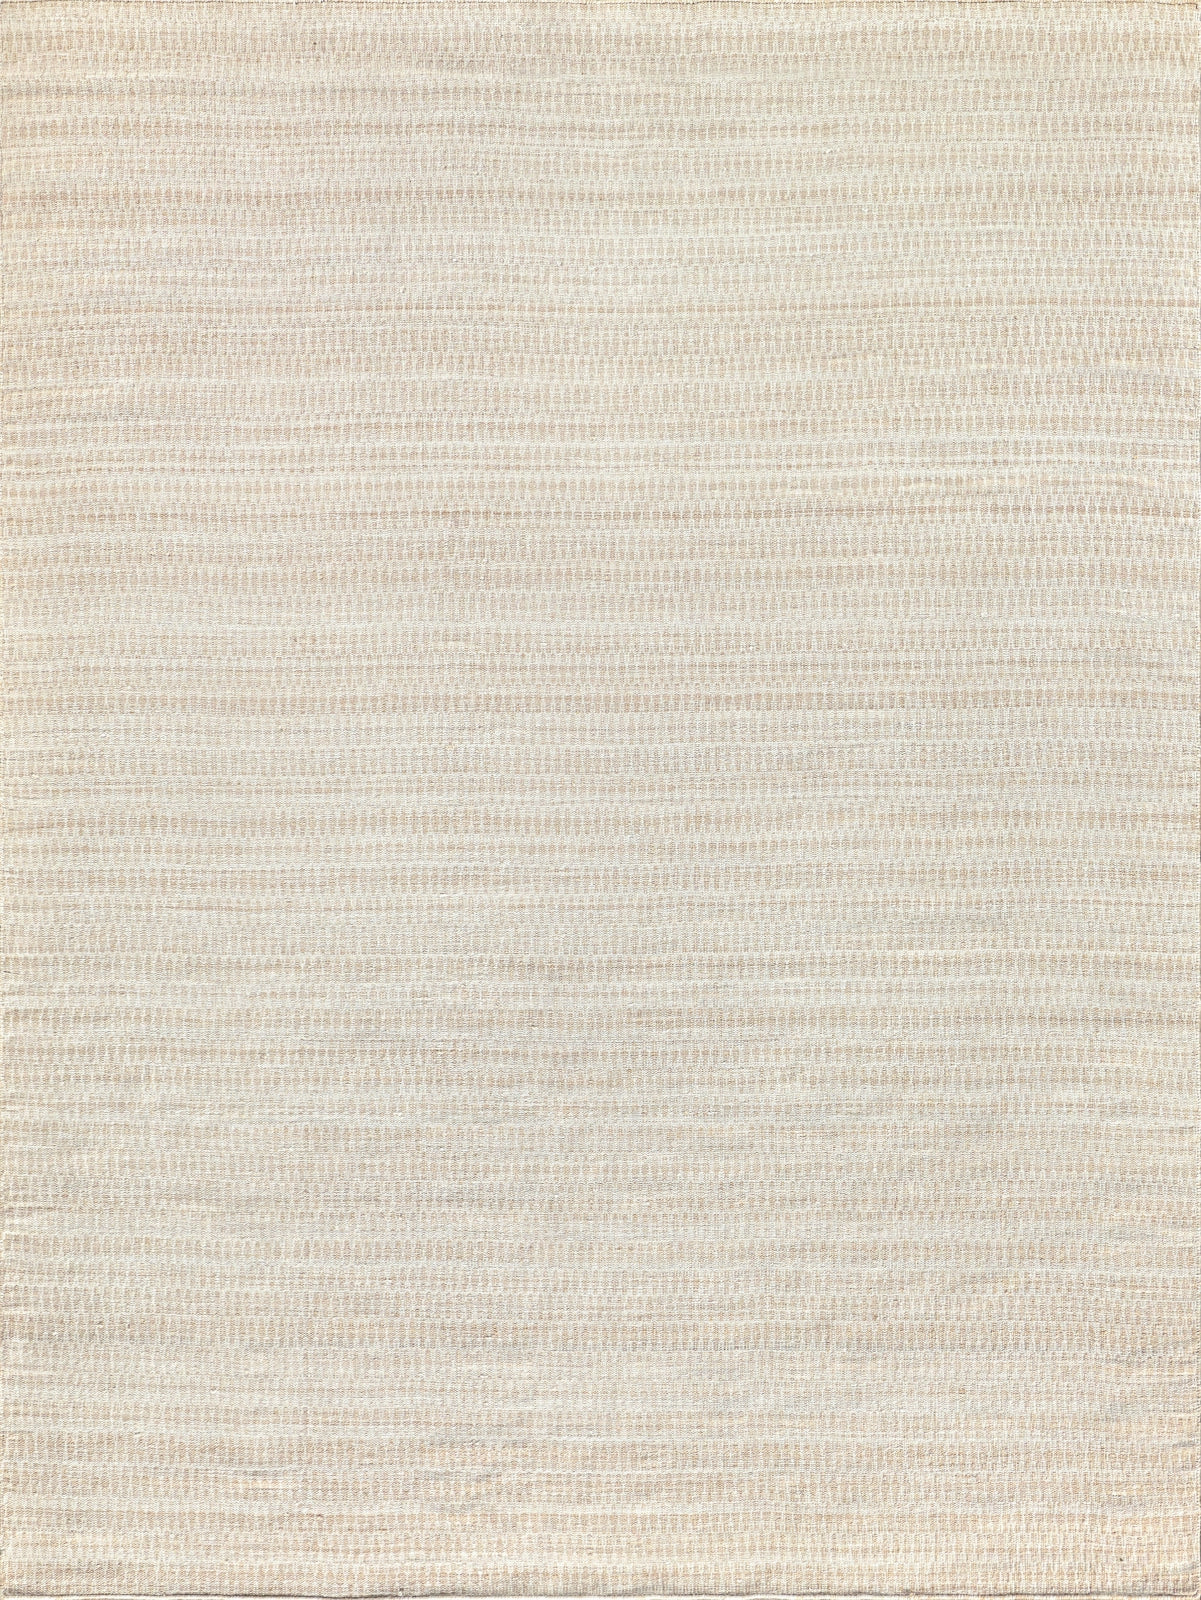 Exquisite Rugs Florence 4881 Light Beige Area Rug